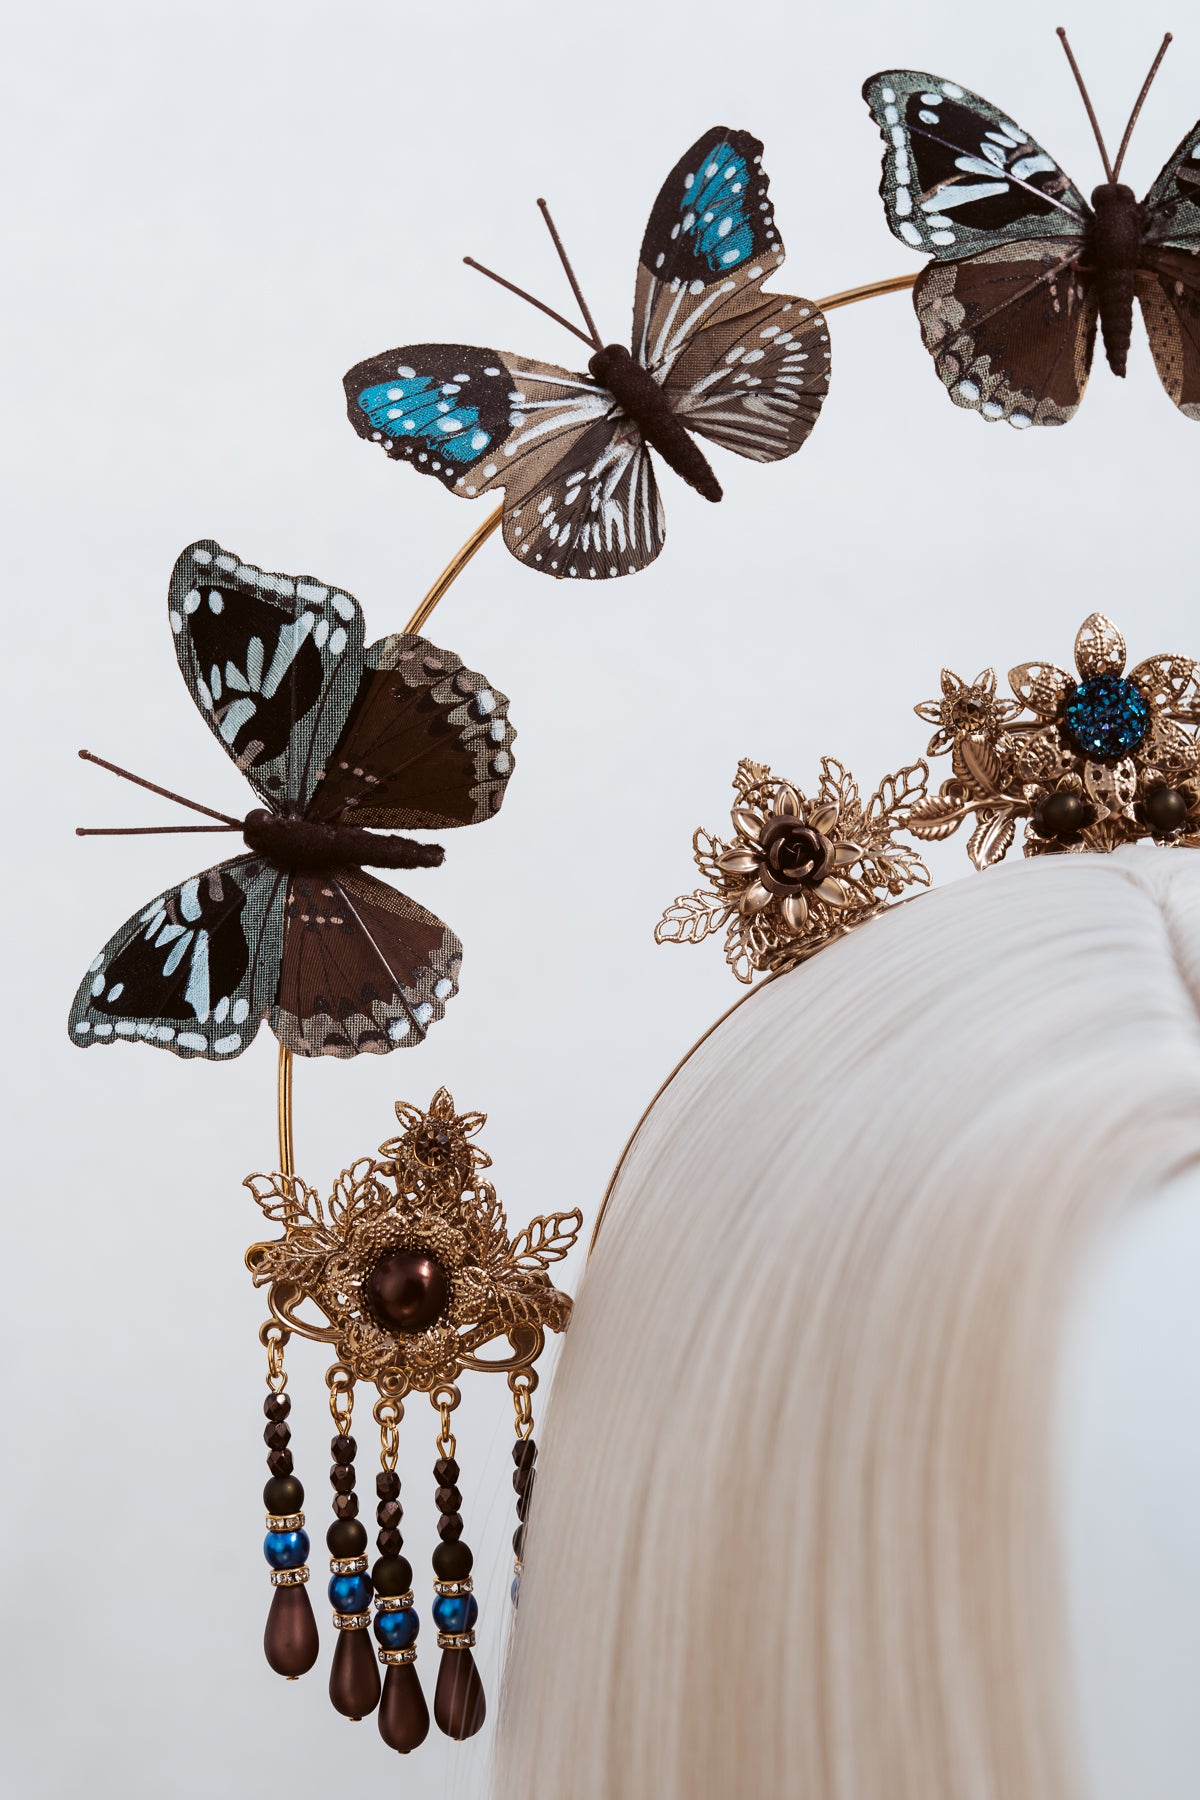 Butterfly Halo Crown